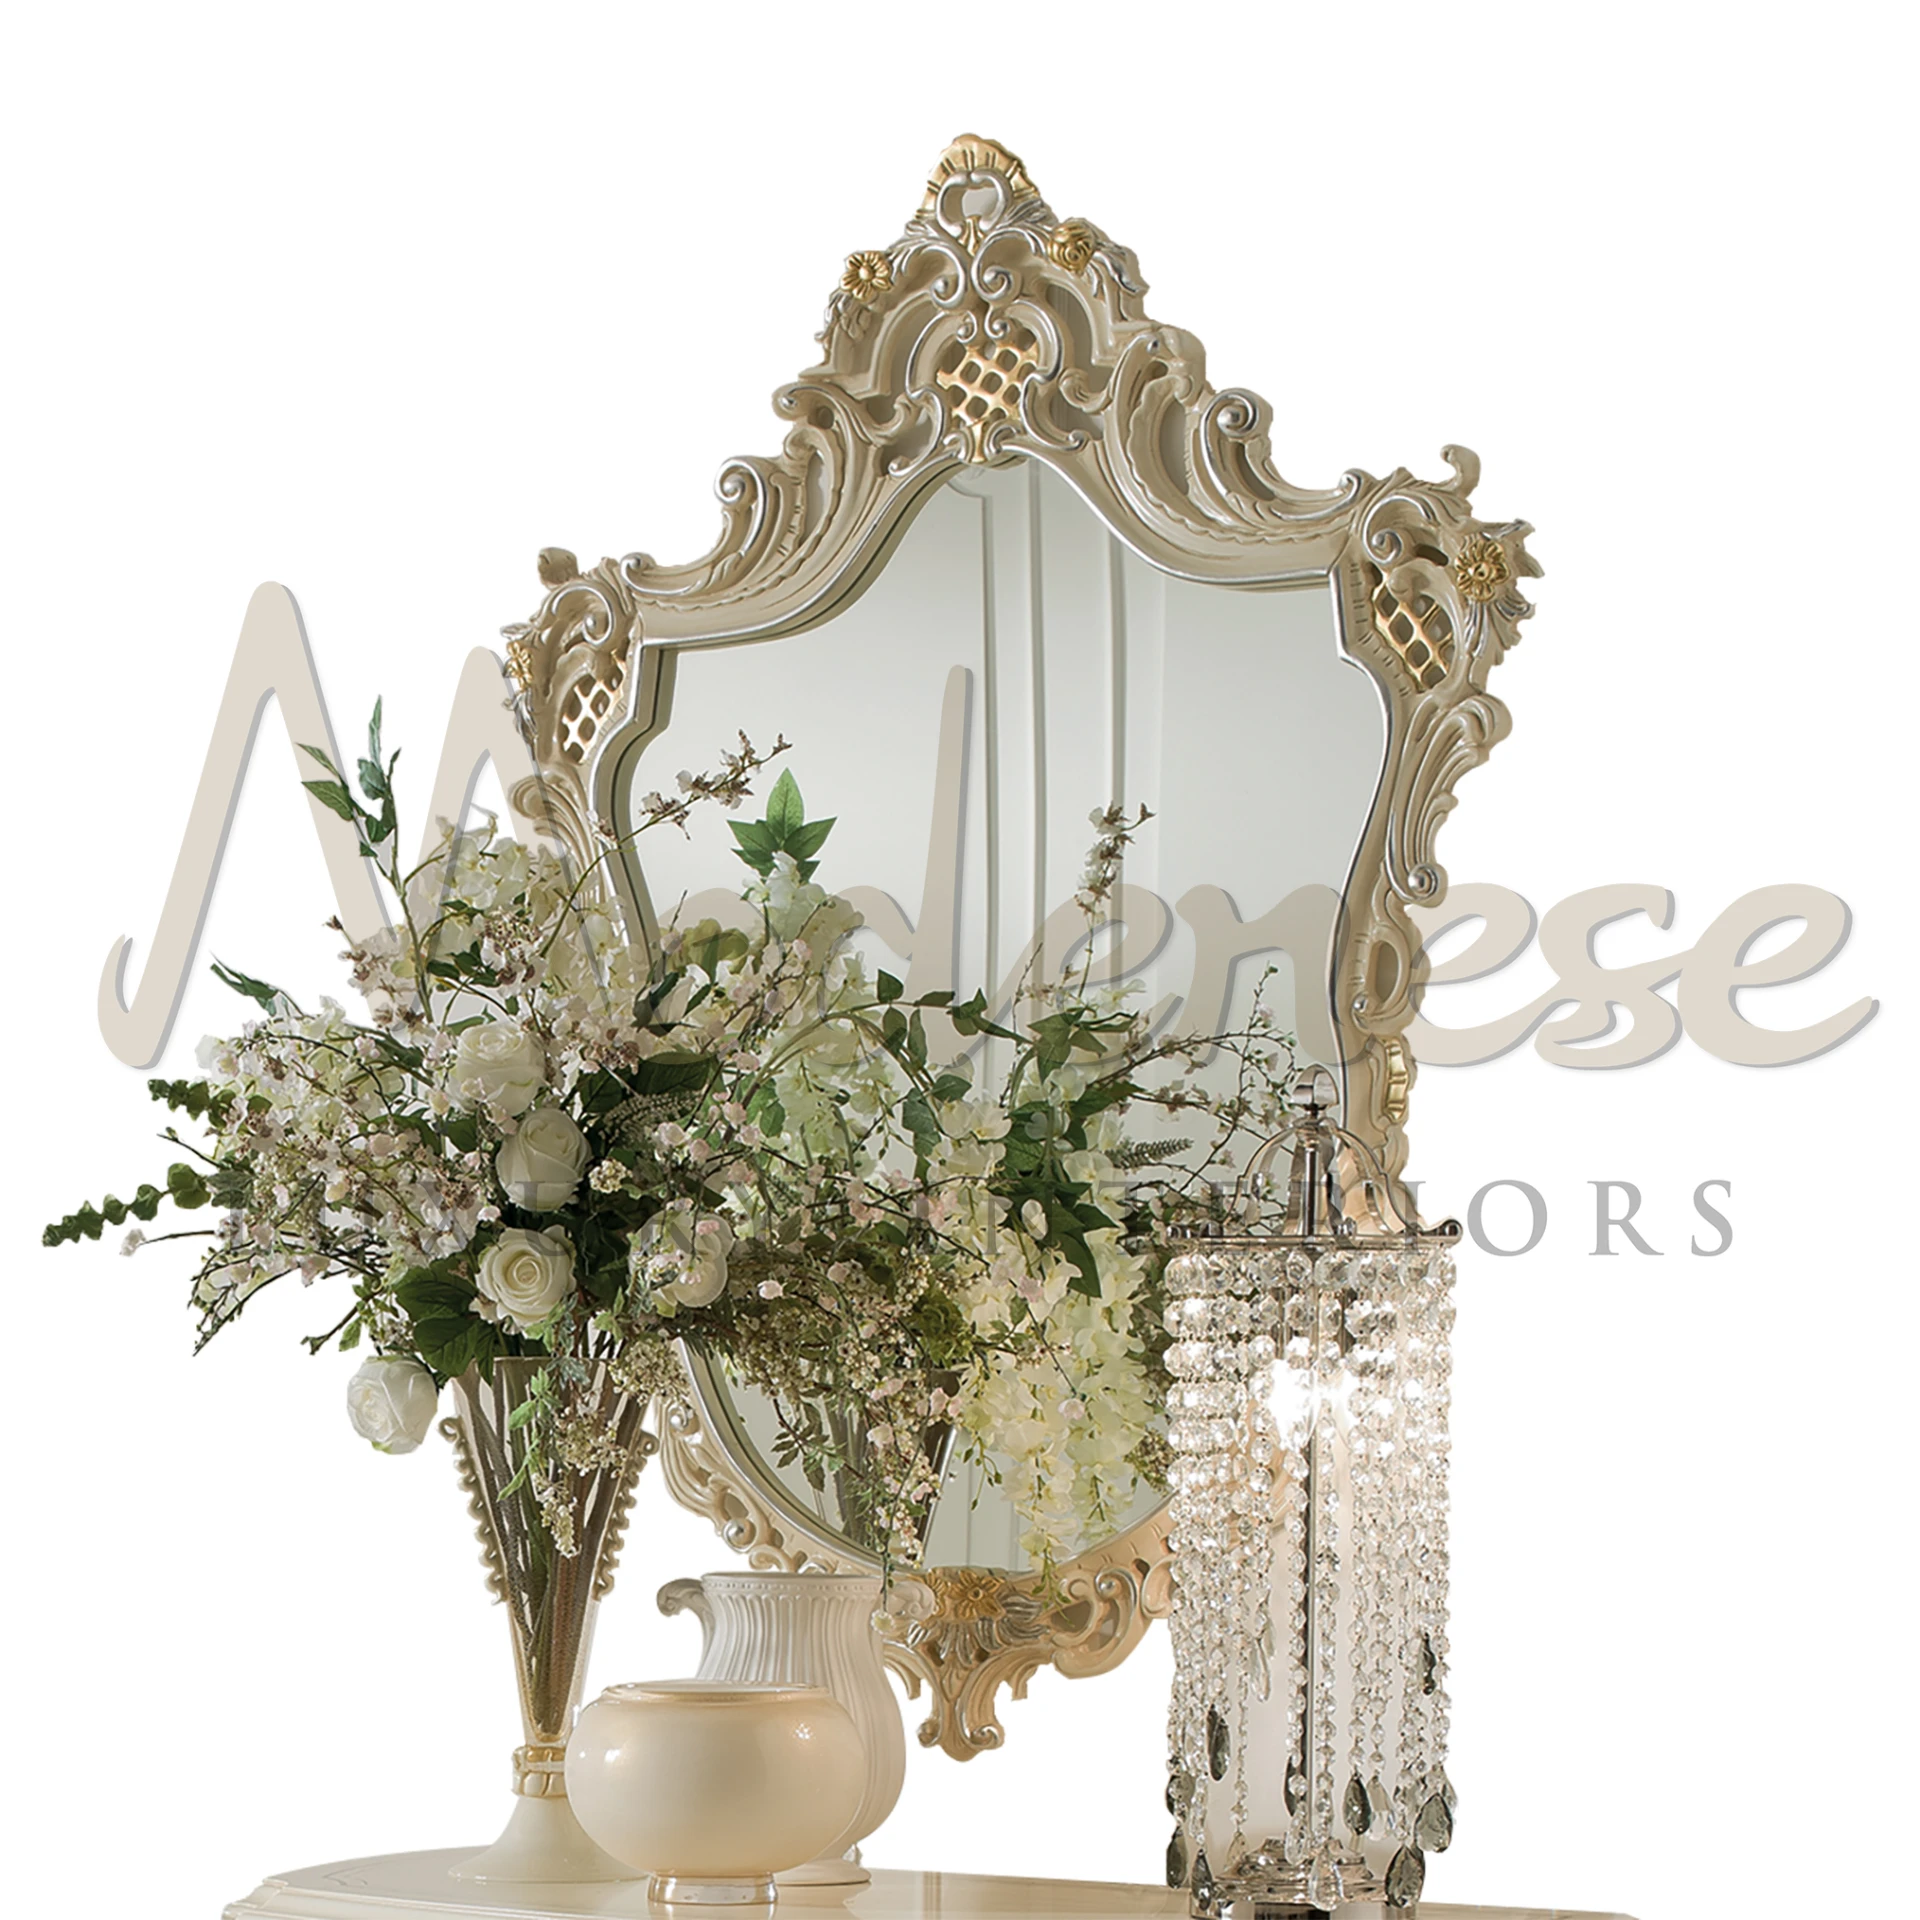 Hand Carved Wall Mirror, a masterpiece of classic design, painted and polished for luxury interior elegance.